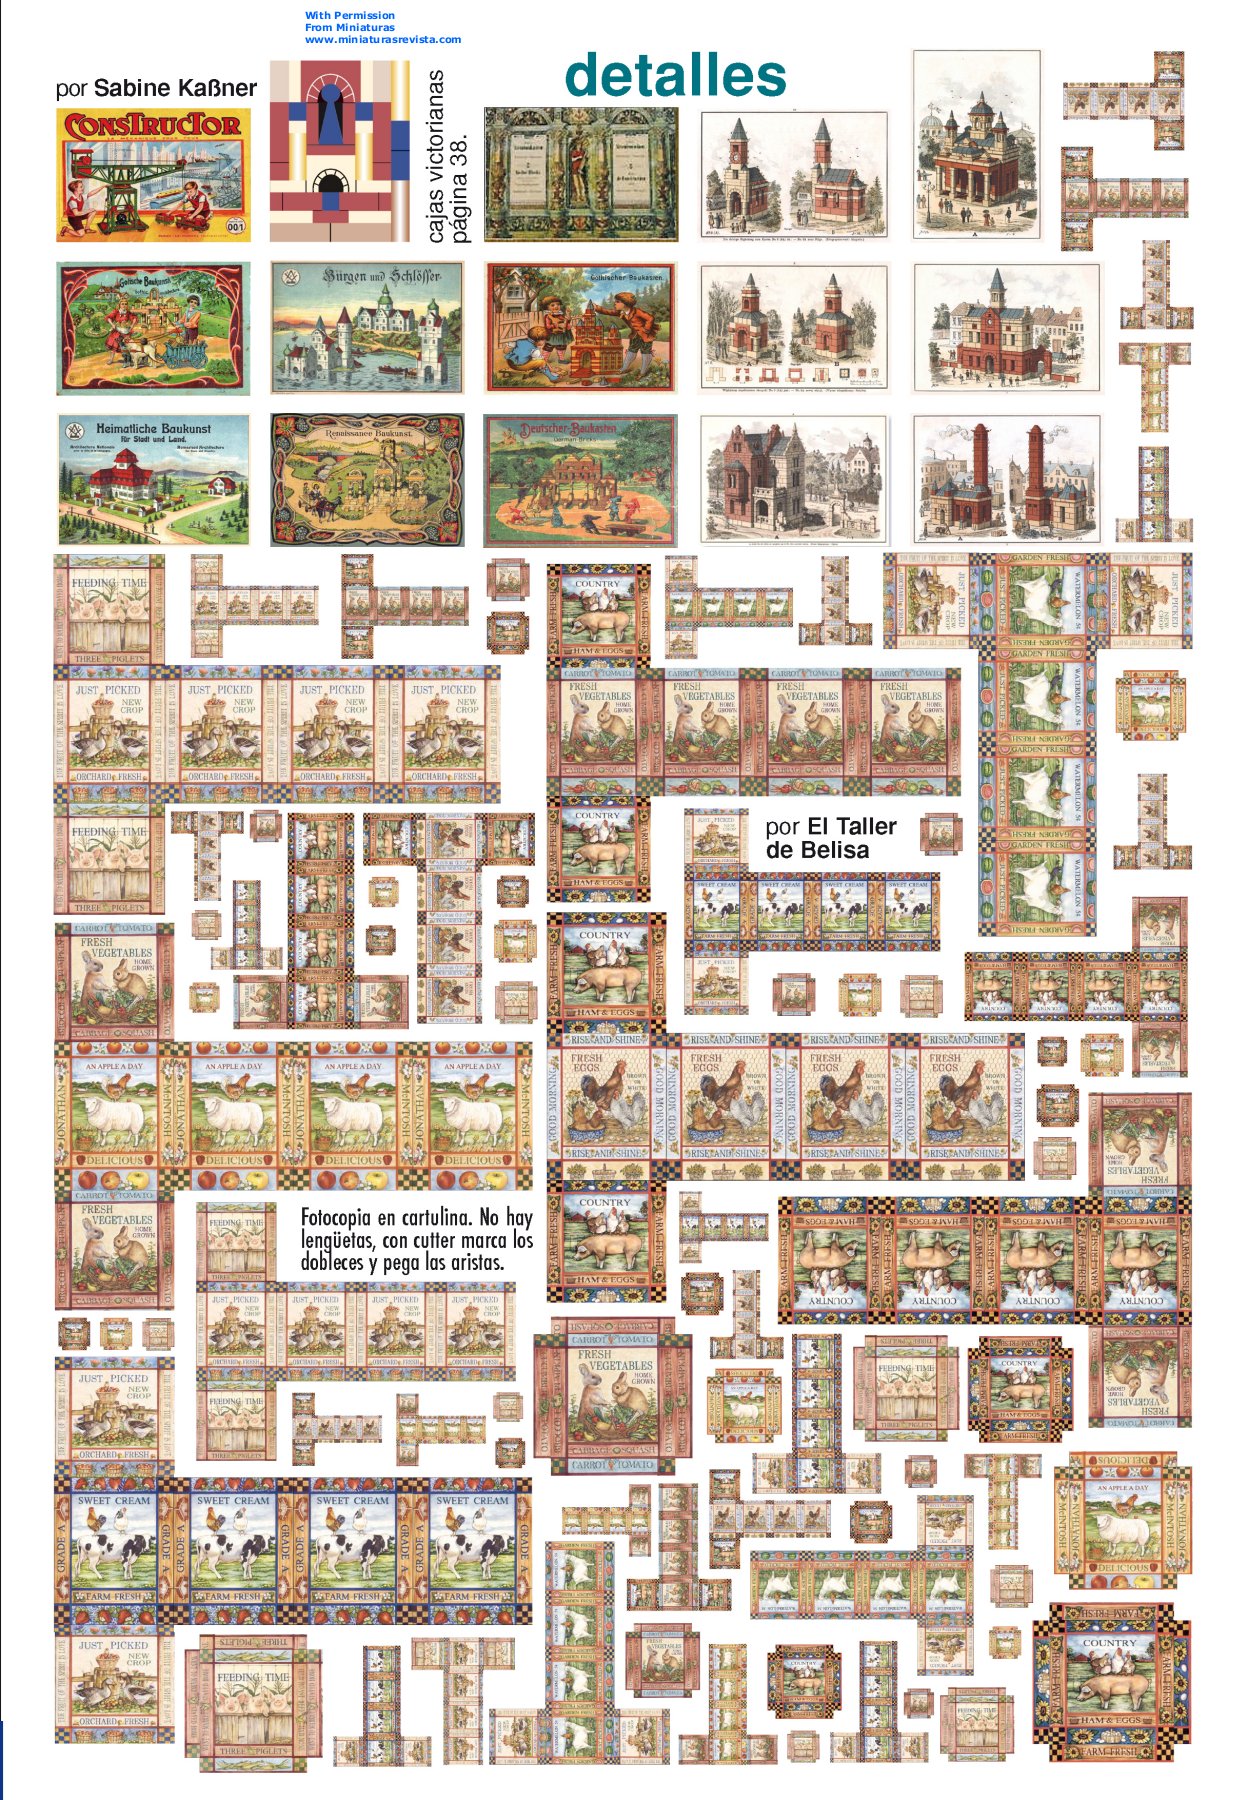 free-download-dolls-house-miniature-printable-wallpaper-review-ebooks-1248x1800-for-your